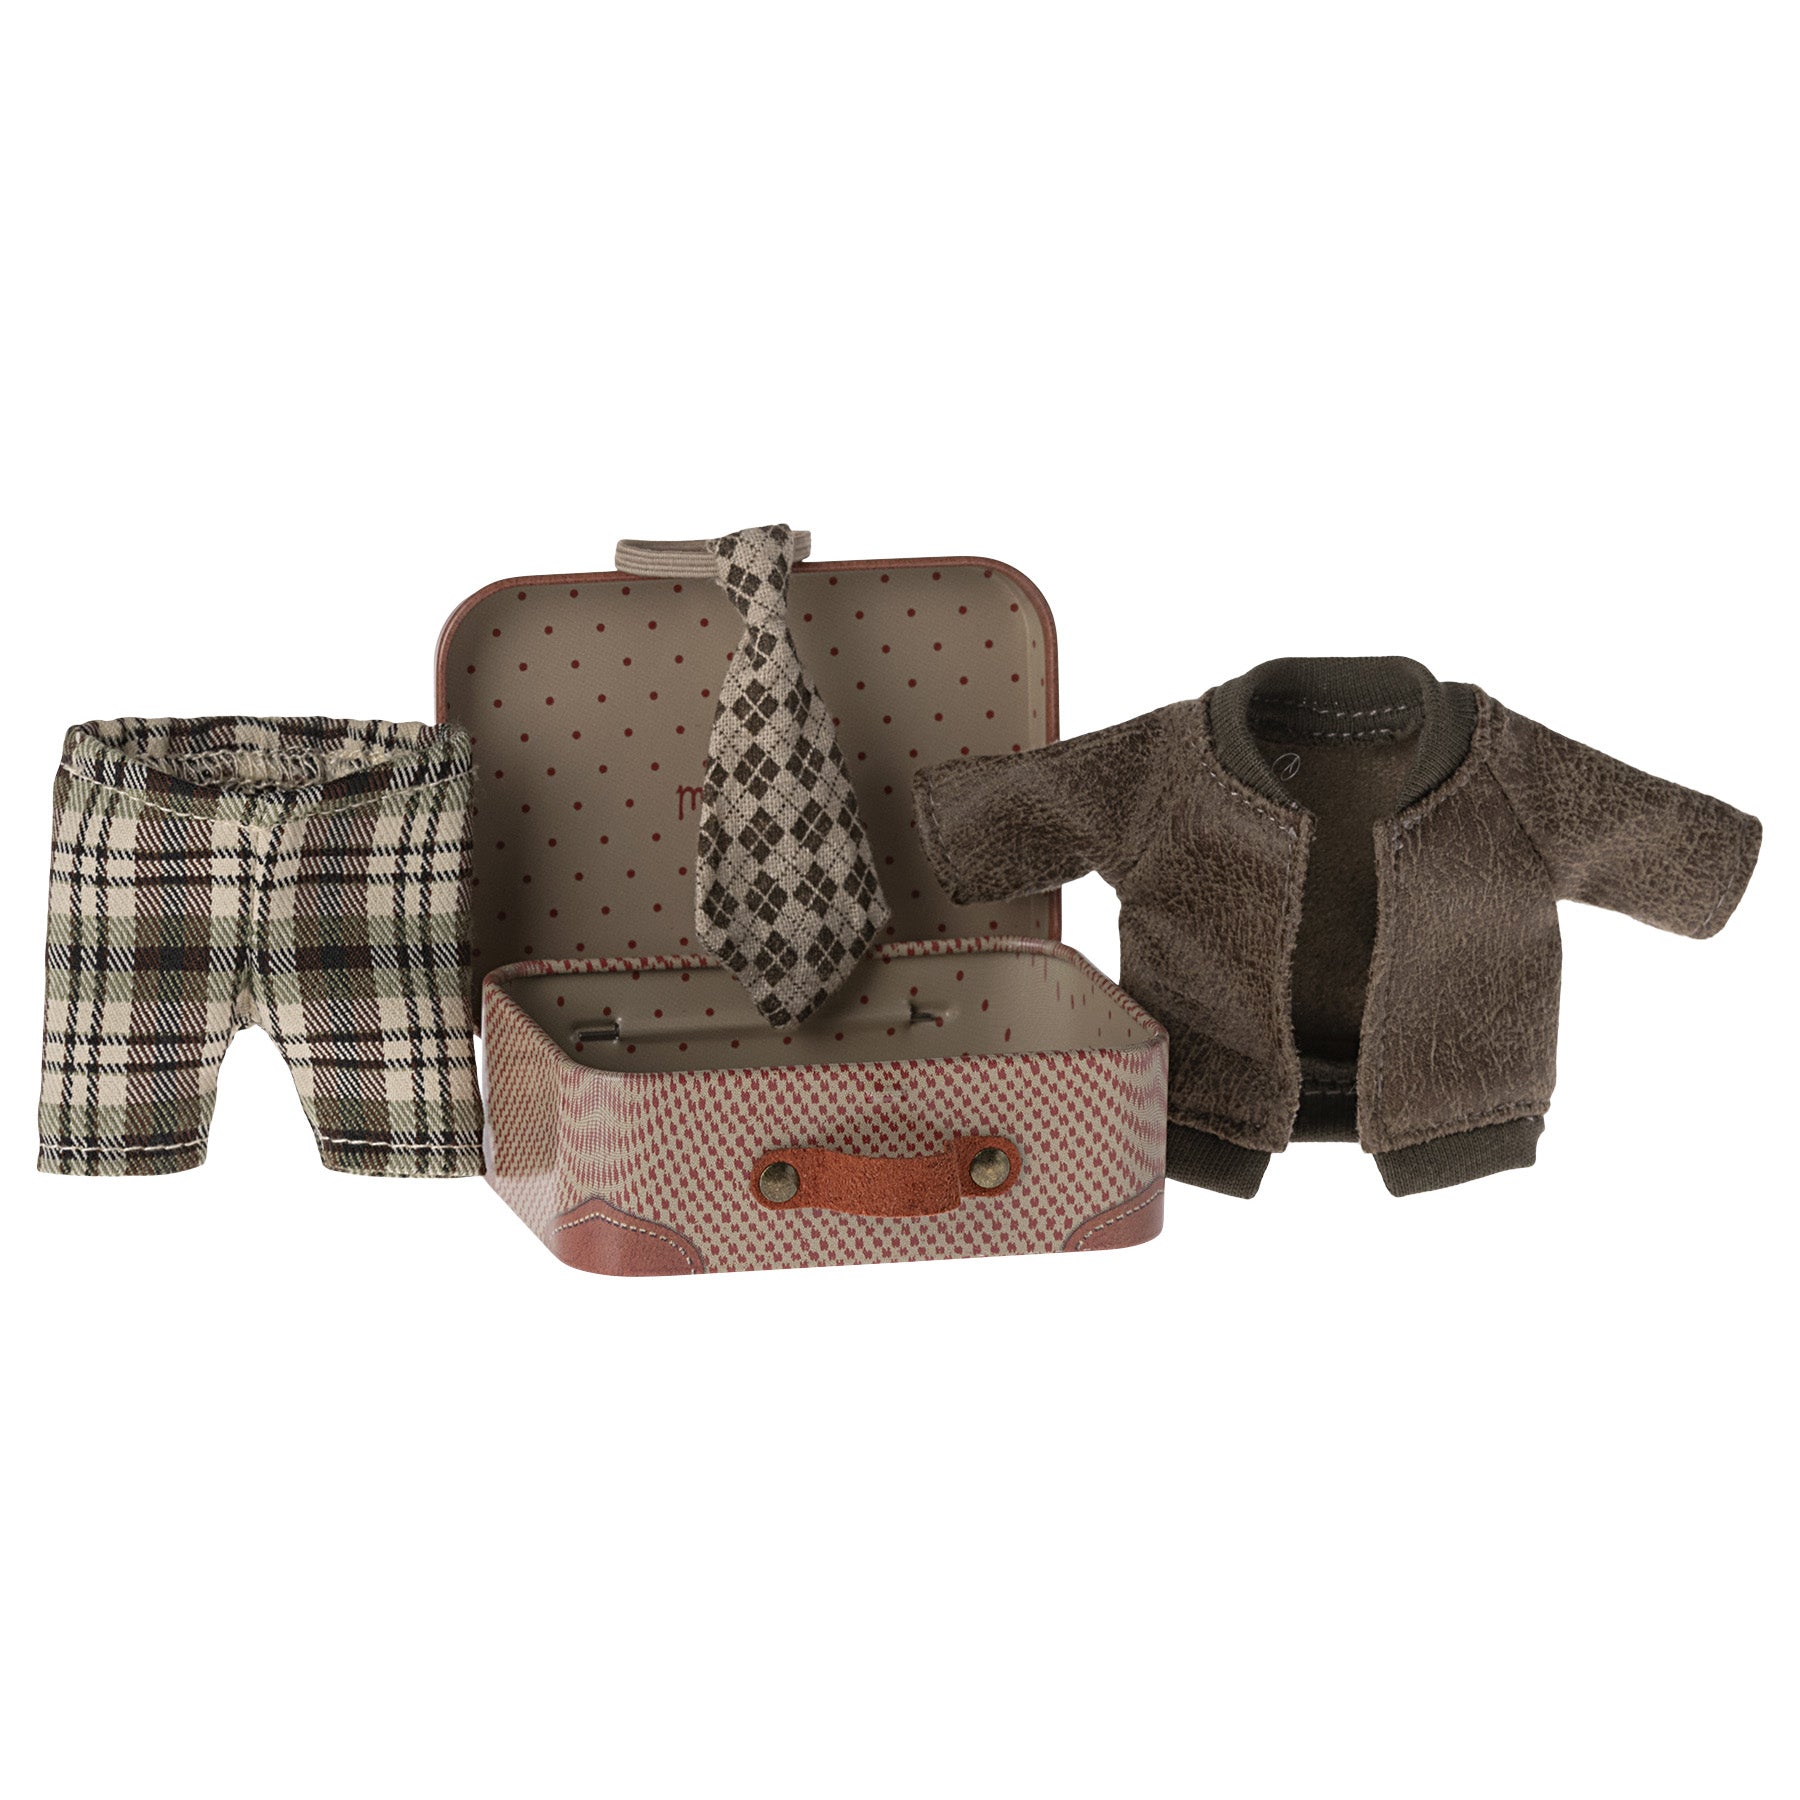 Maileg Jacket, Pants and Tie in a Suitcase for grandpa mouse